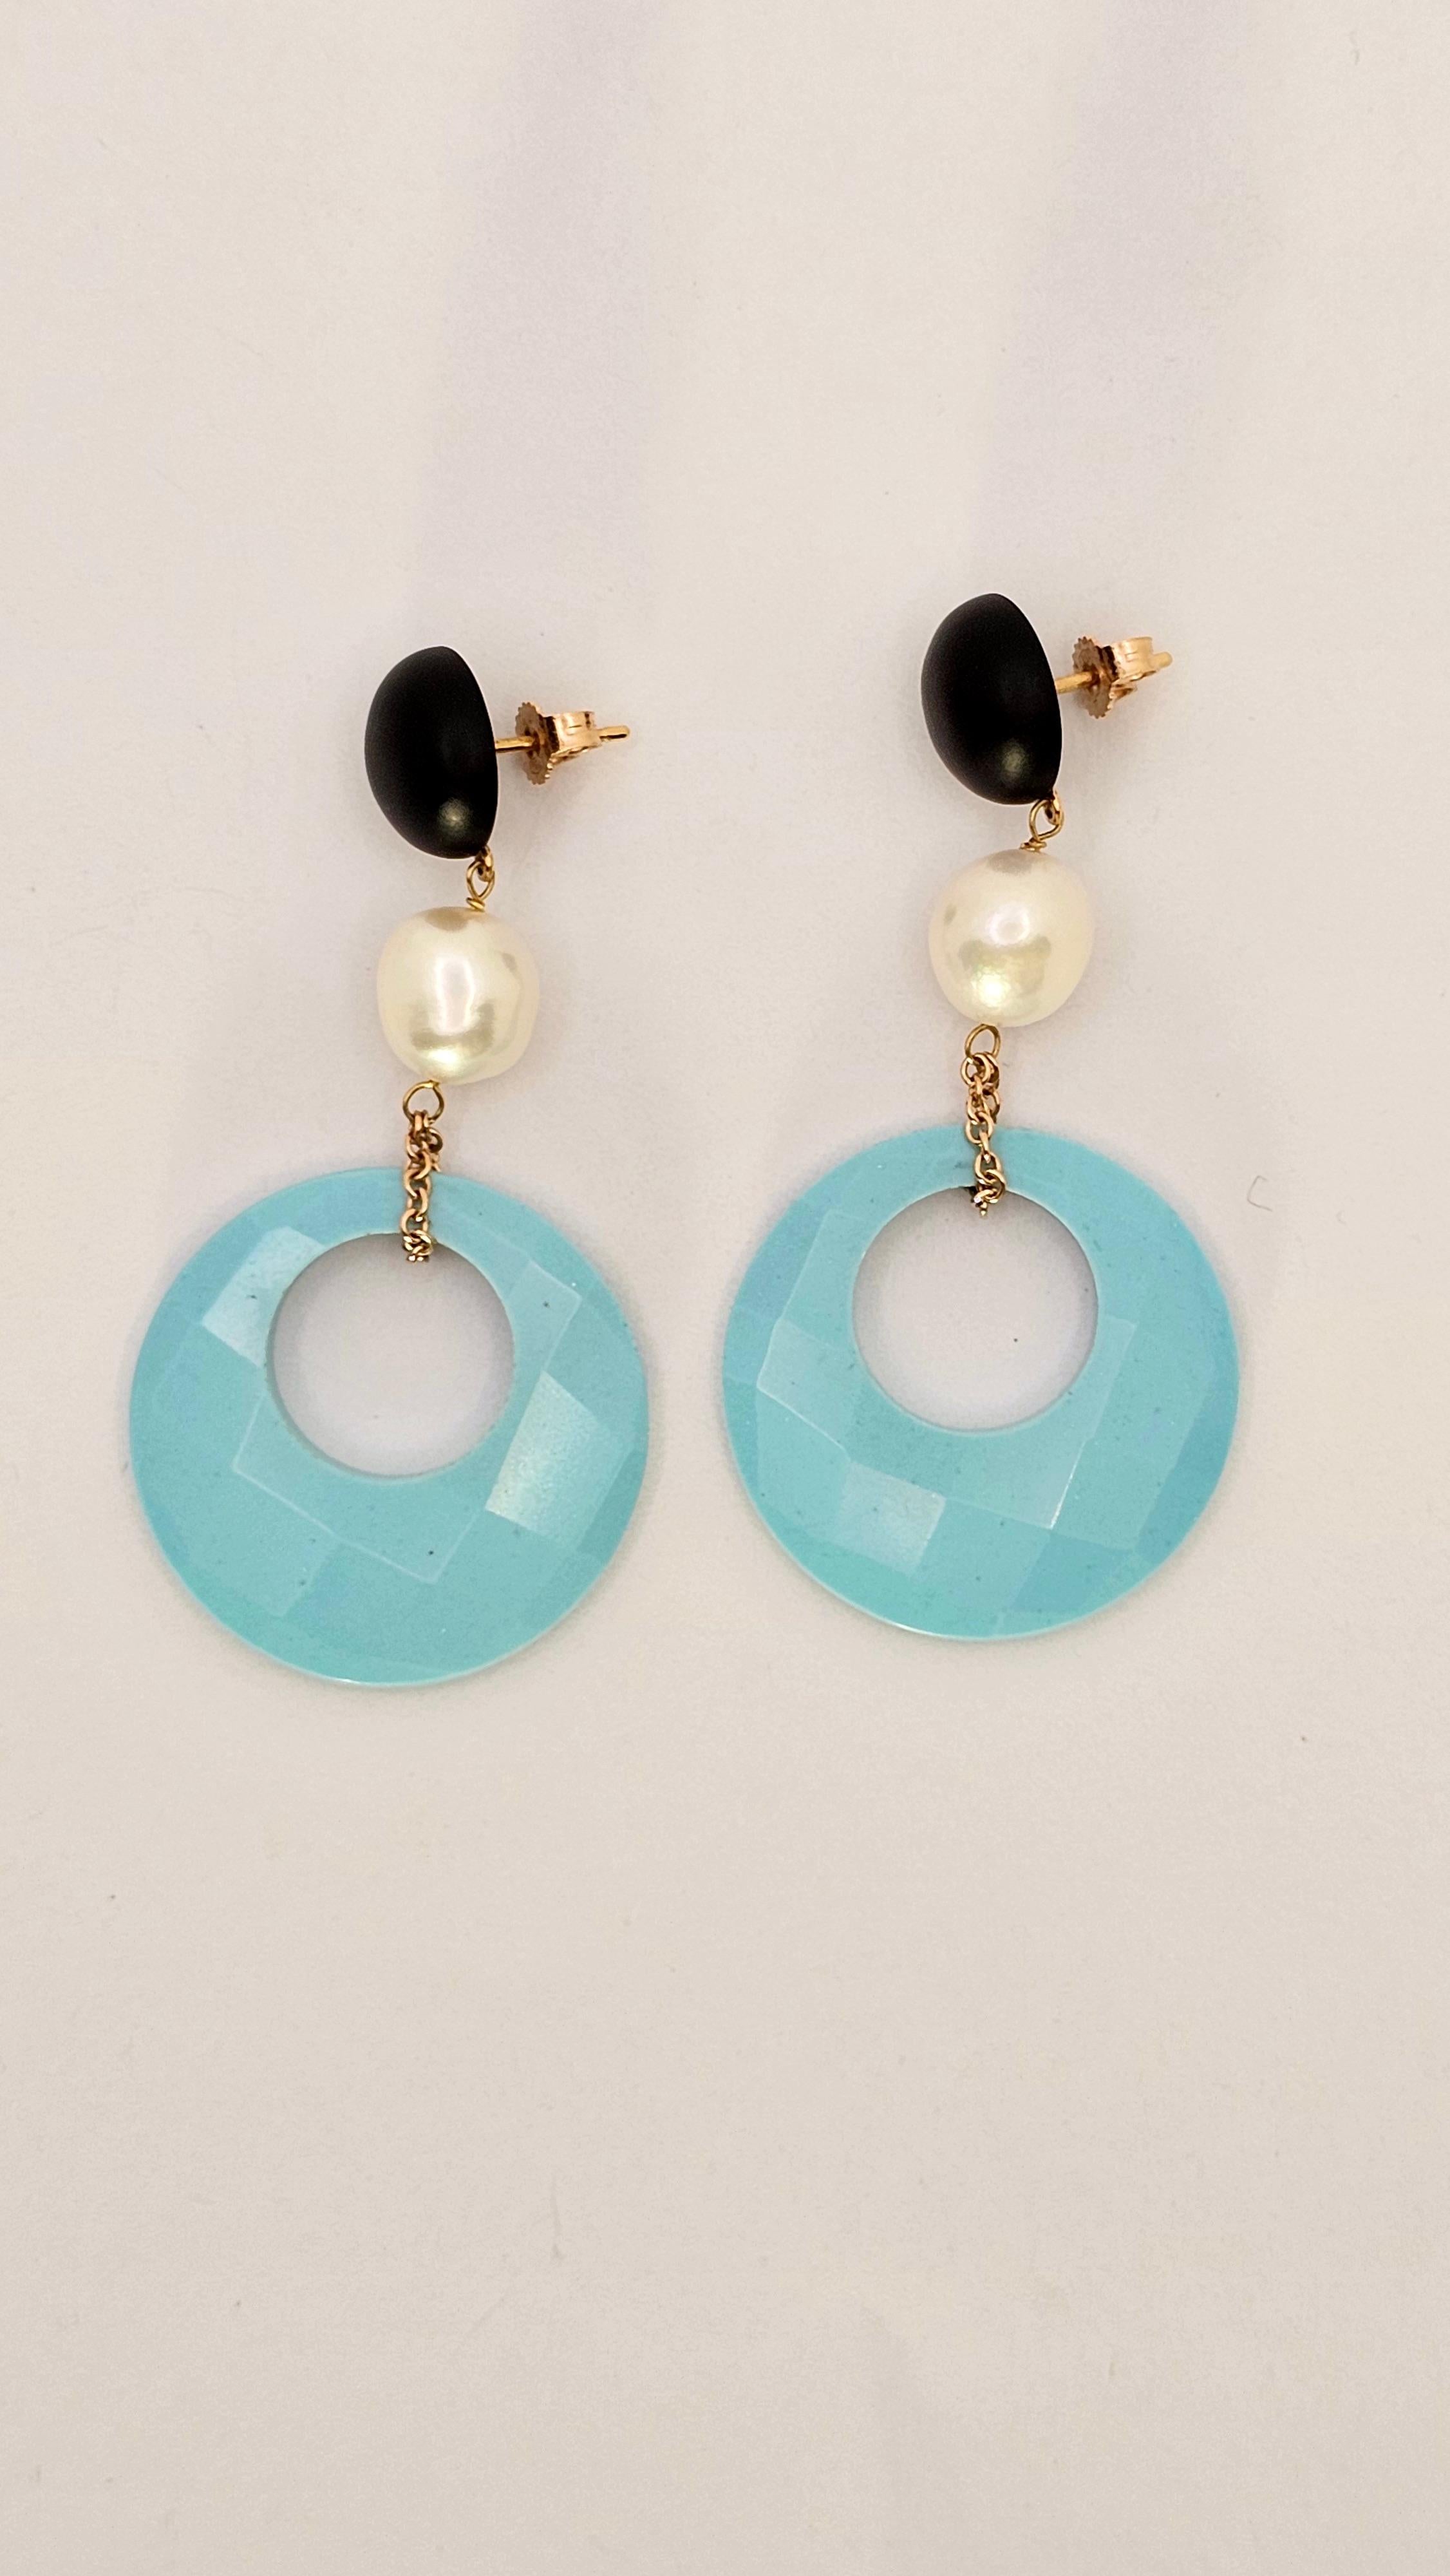 A jewel of 1960s design.
These earrings are made in three parts.
The upper, button-shaped part is made of jade with a diameter of 12 mm, the middle part is a white freshwater pearl with a diameter of 95 mm, and the lower part is an open turquoise